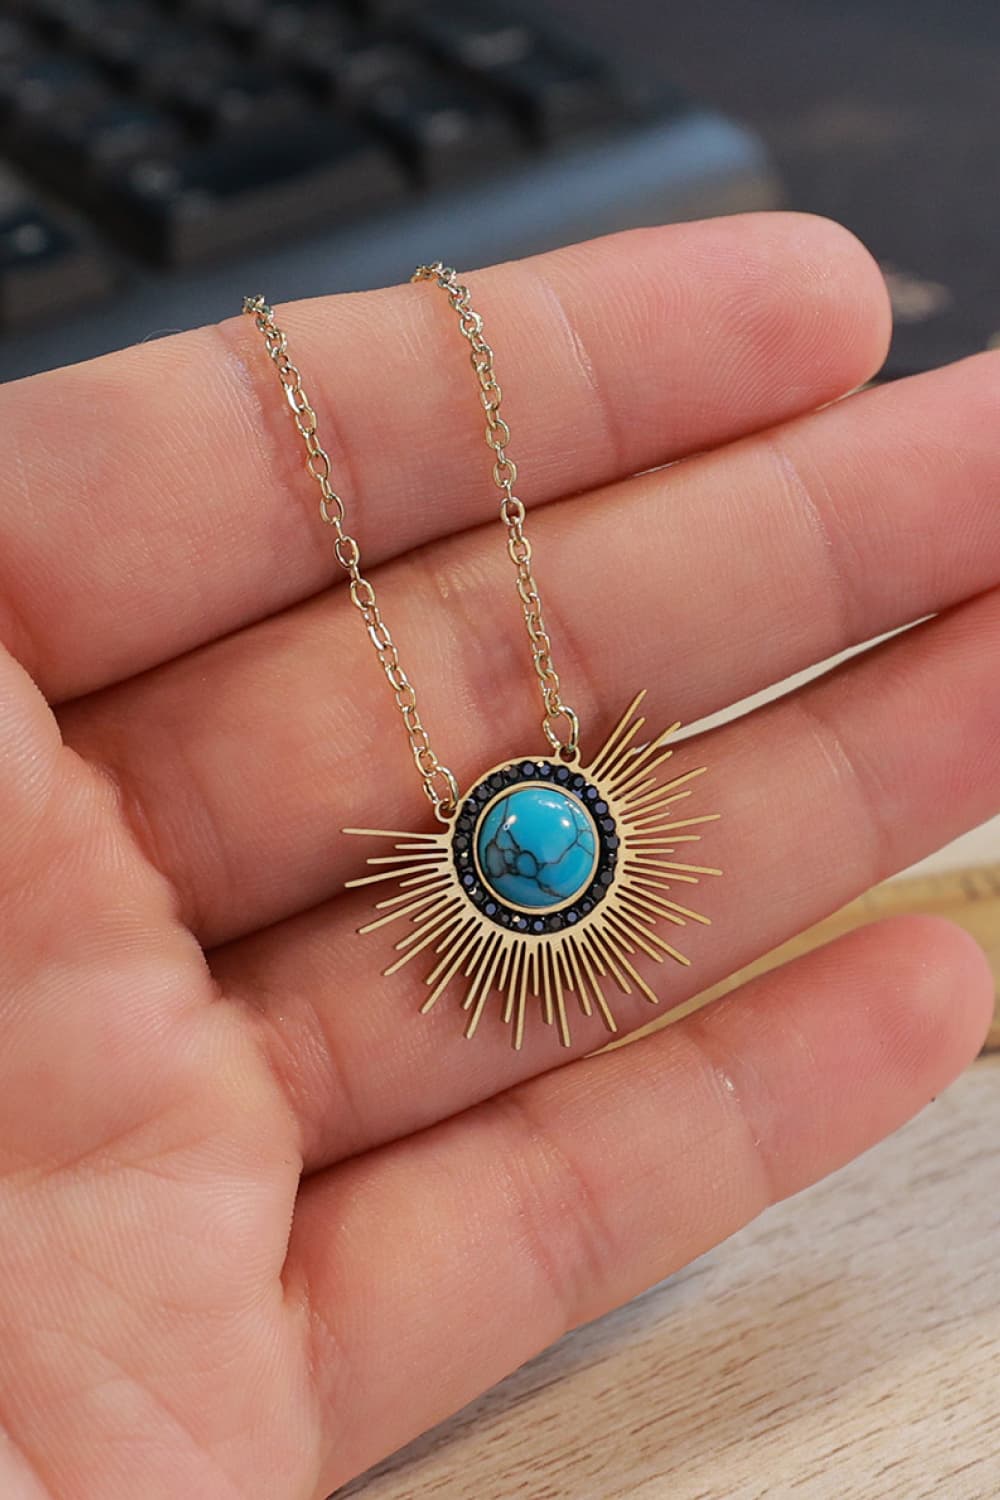 Turquoise 14K Gold Plated Pendant Necklace - AllIn Computer